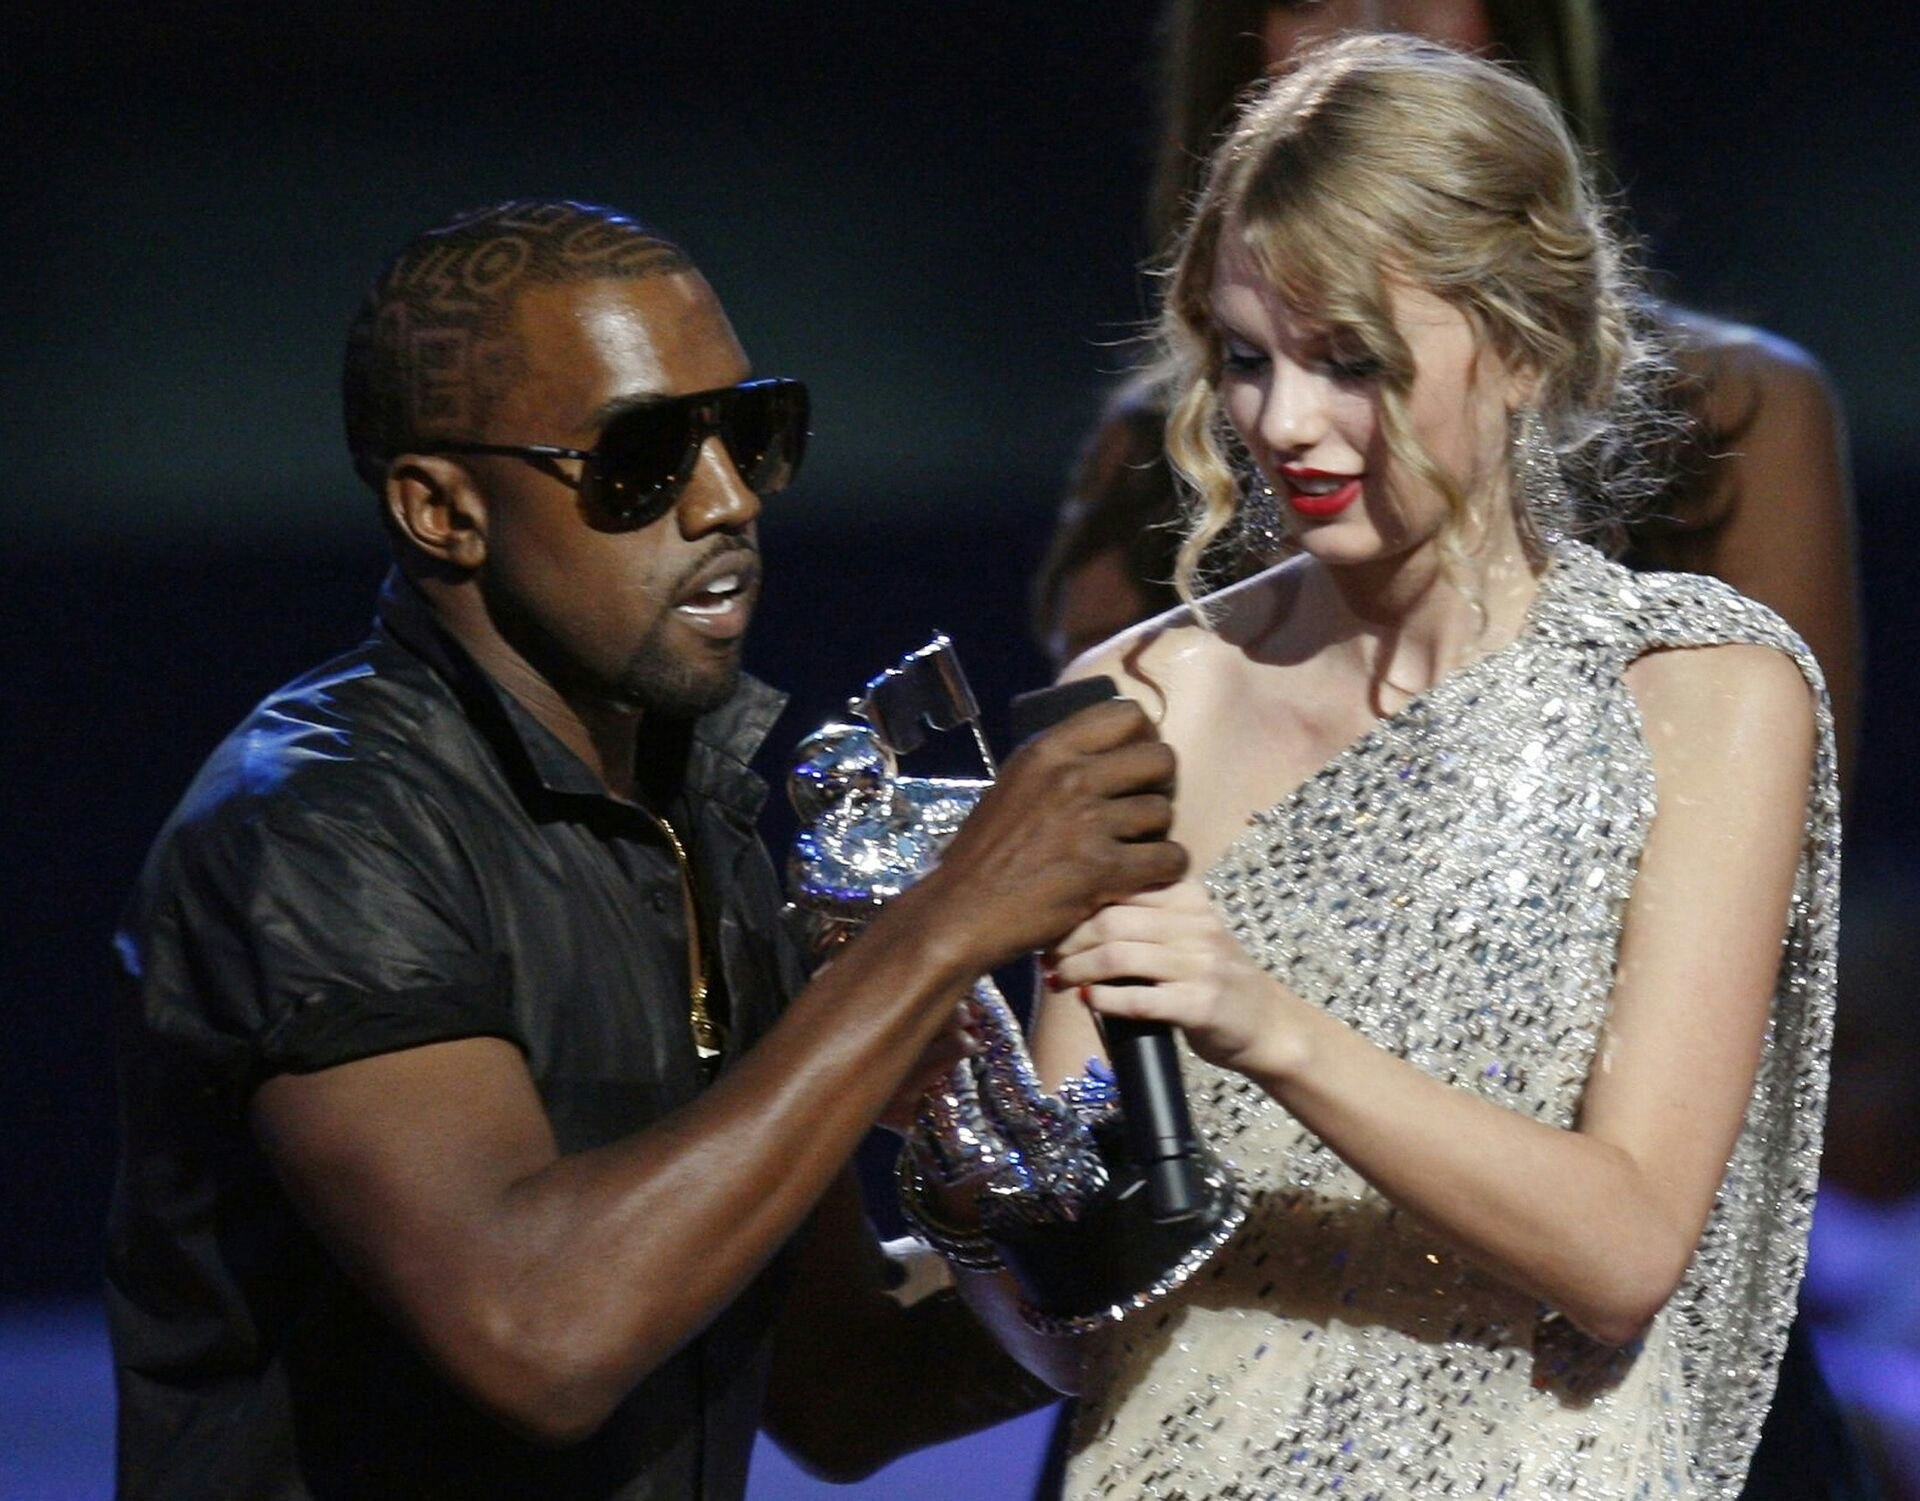 Kanye West takes the microphone from best female video winner Taylor Swift as he praises the video entry from Beyonce at the 2009 MTV Video Music Awards in New York, September 13, 2009. REUTERS/Gary Hershorn (UNITED STATES ENTERTAINMENT)